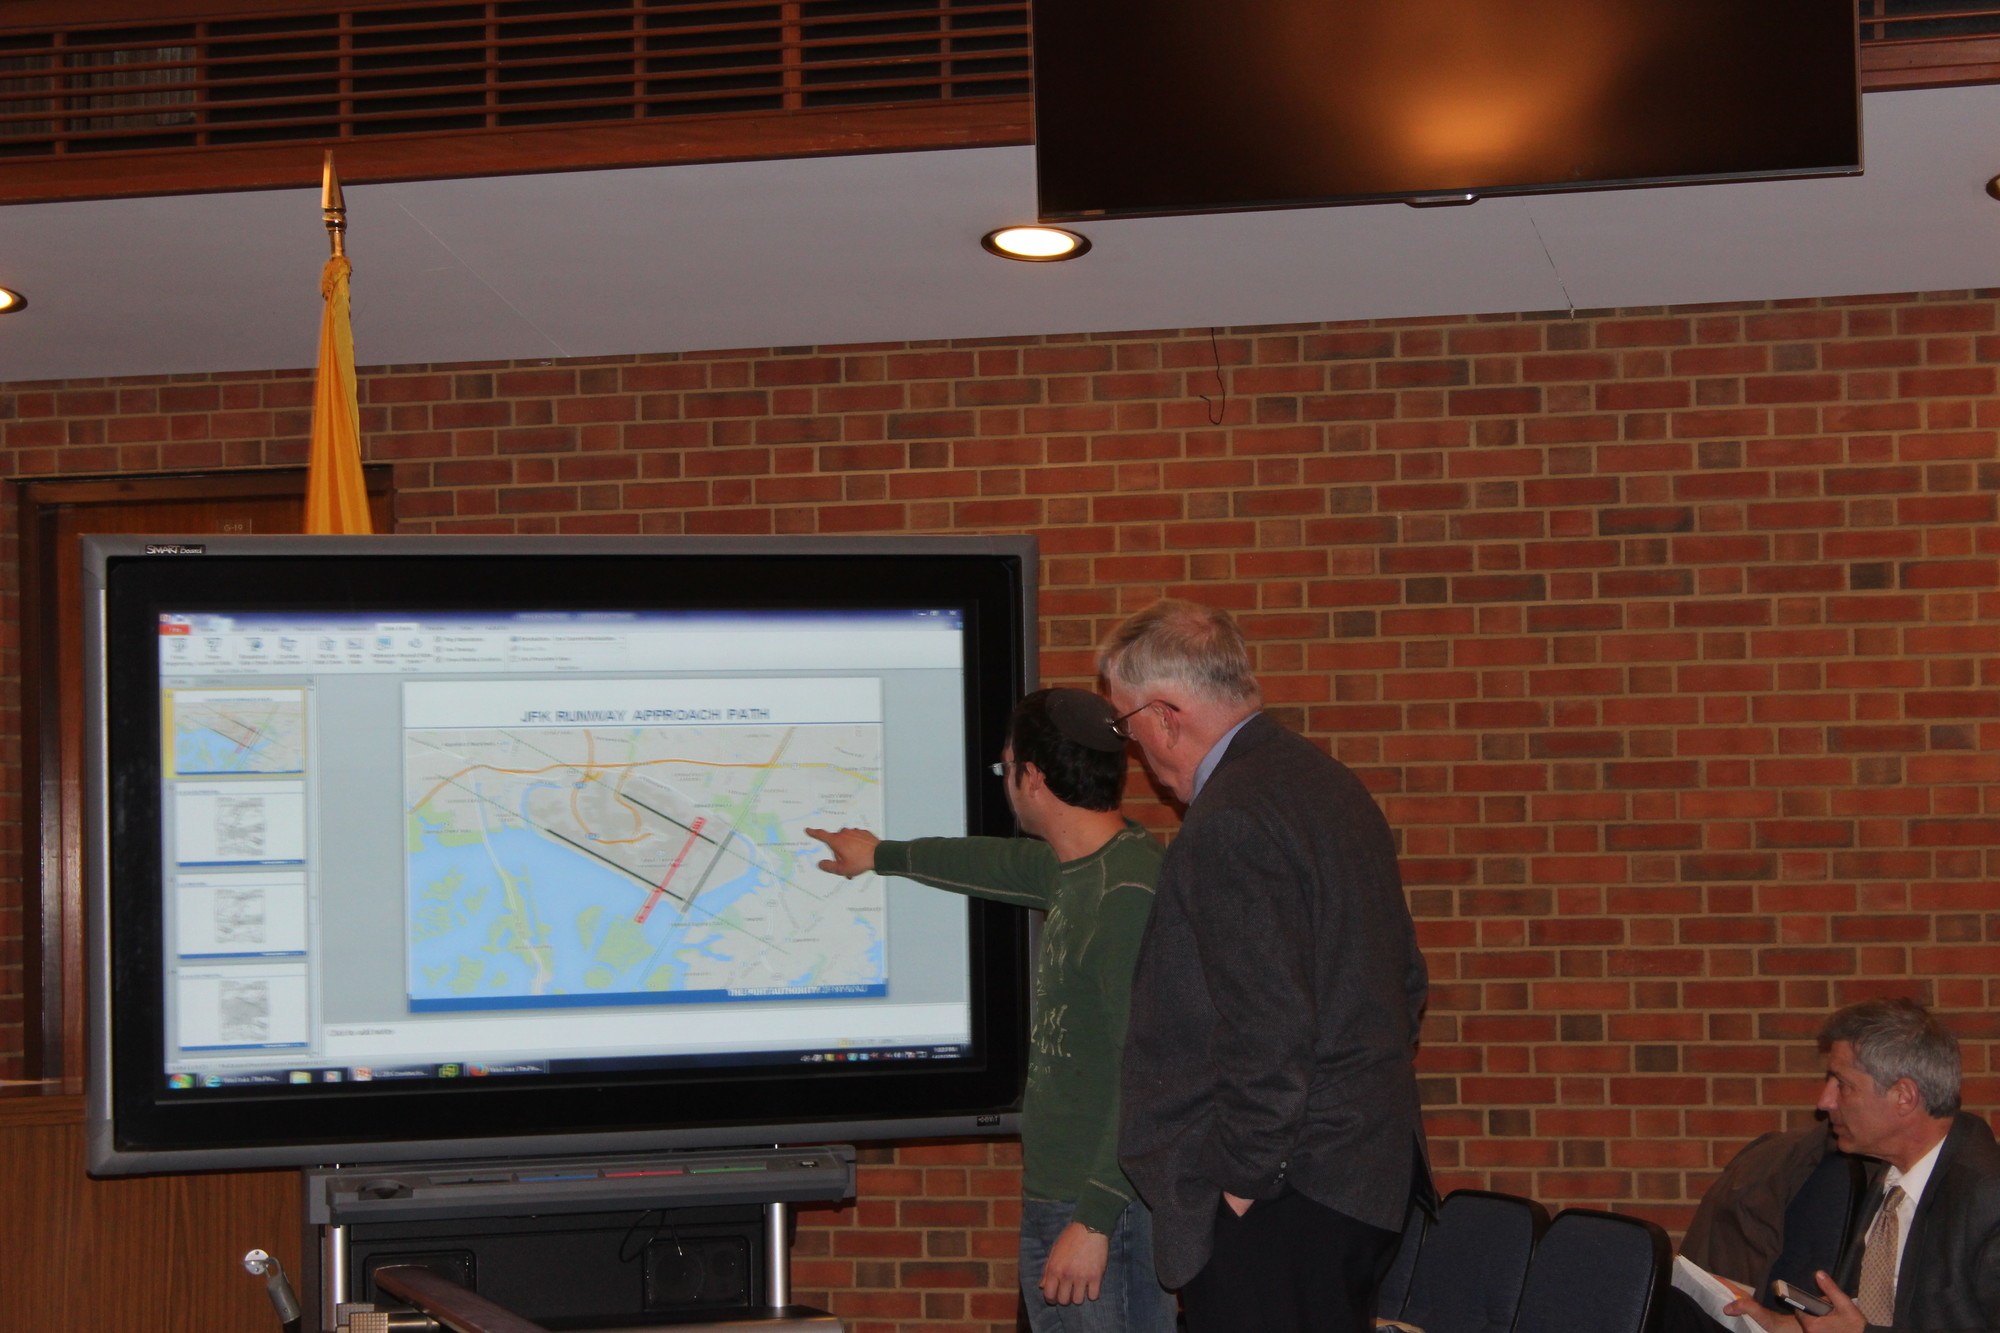 Residents complained about redirected flights and the noise generated by airplanes Above, at the TVASNAC meeting on Monday, Daniel Segall of North Woodmere, left, showed FAA spokesman Jim Peters, where the planes fly over his house.